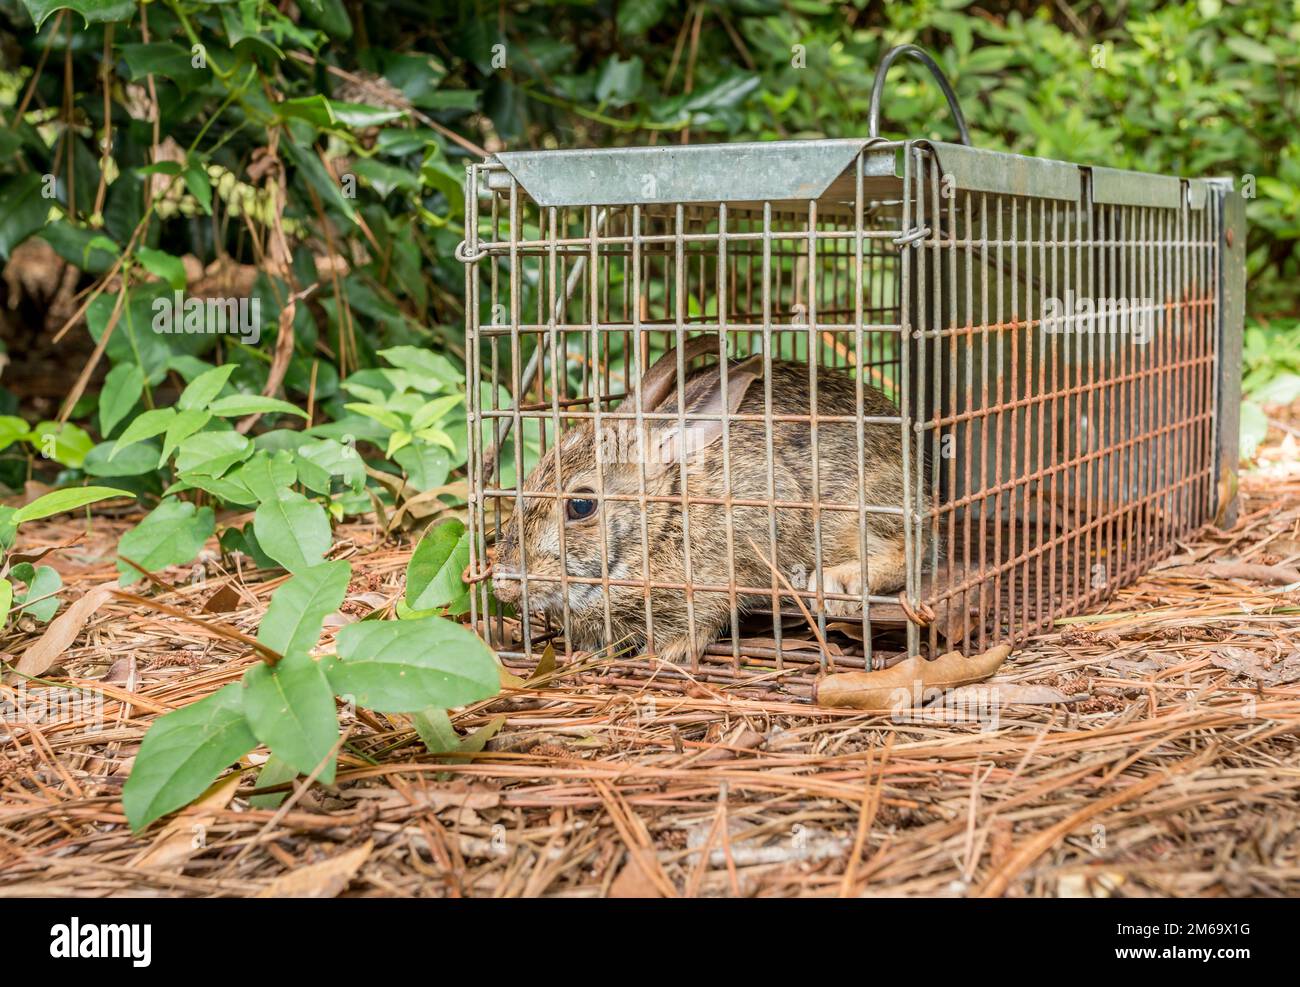 Rabbit in live humane trap. Pest and rodent removal cage. Catch and release wildlife animal control service. Stock Photo